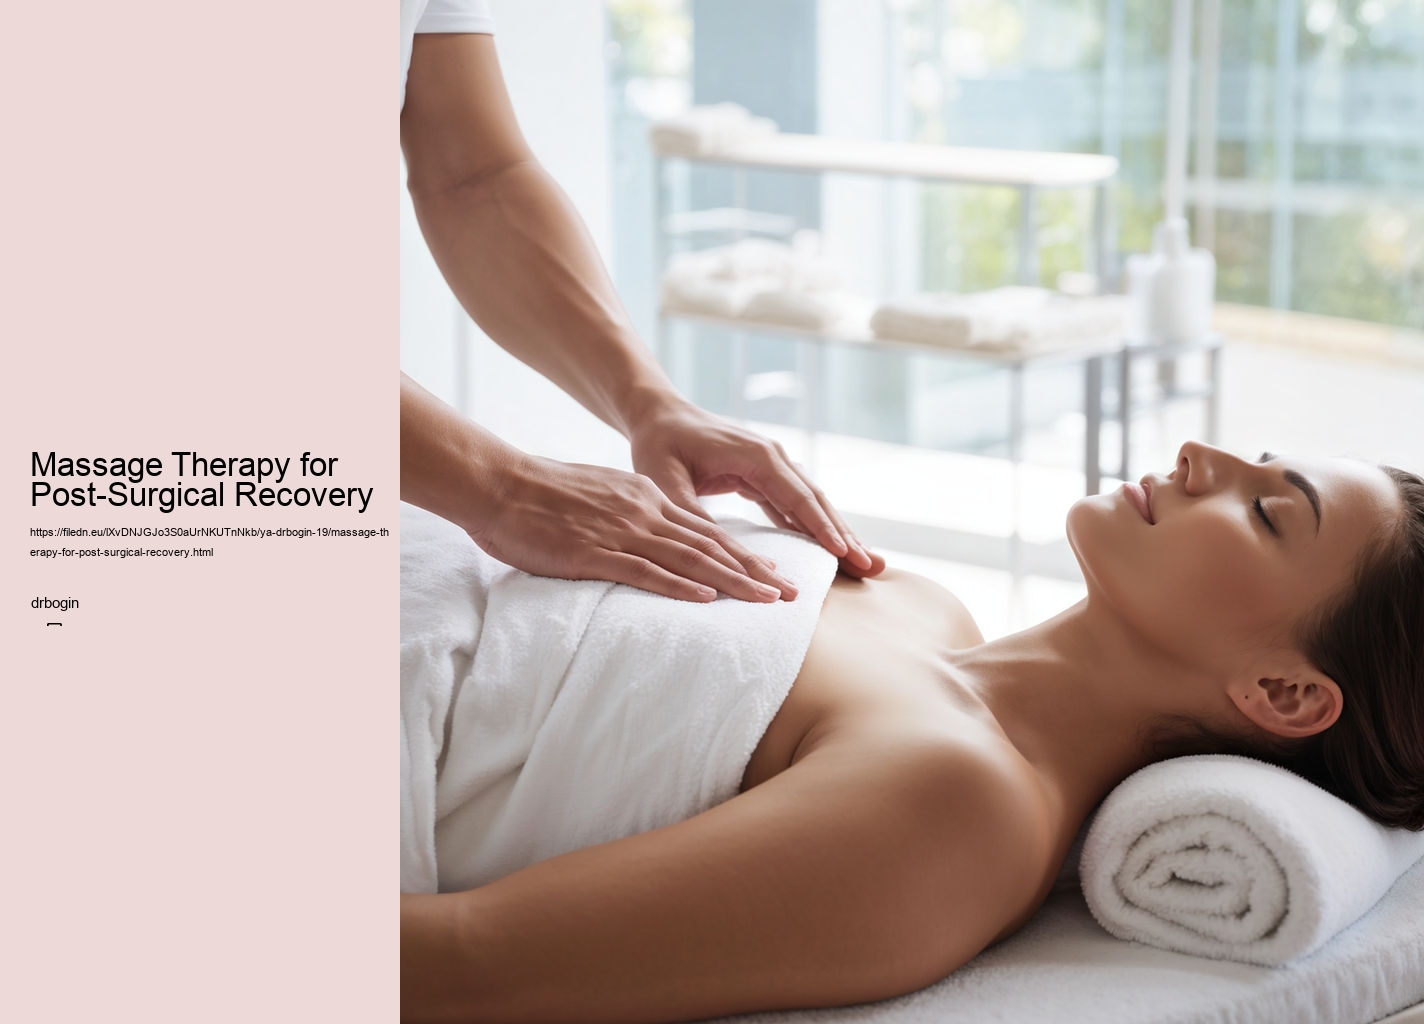 Massage Therapy for Post-Surgical Recovery